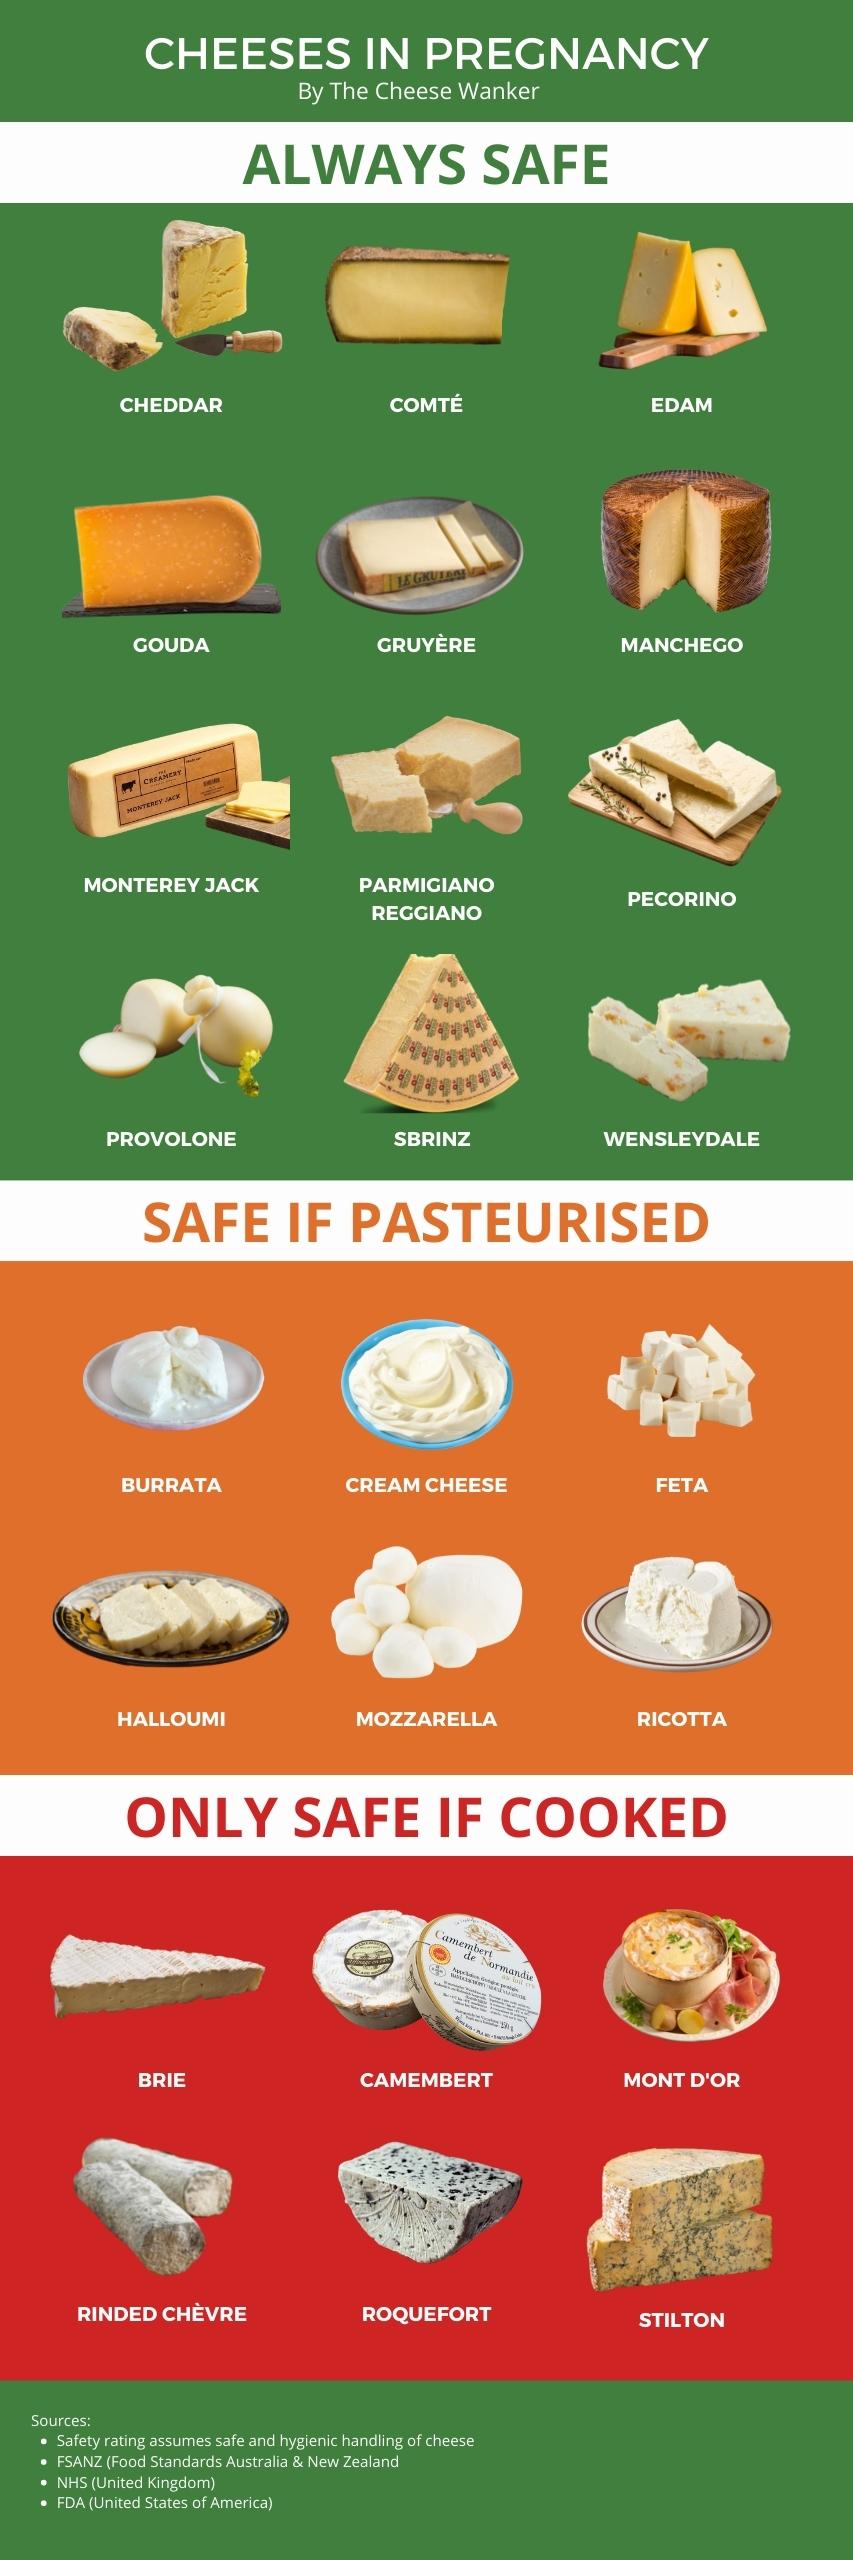 Chart showing cheeses that can be eaten during pregnancy